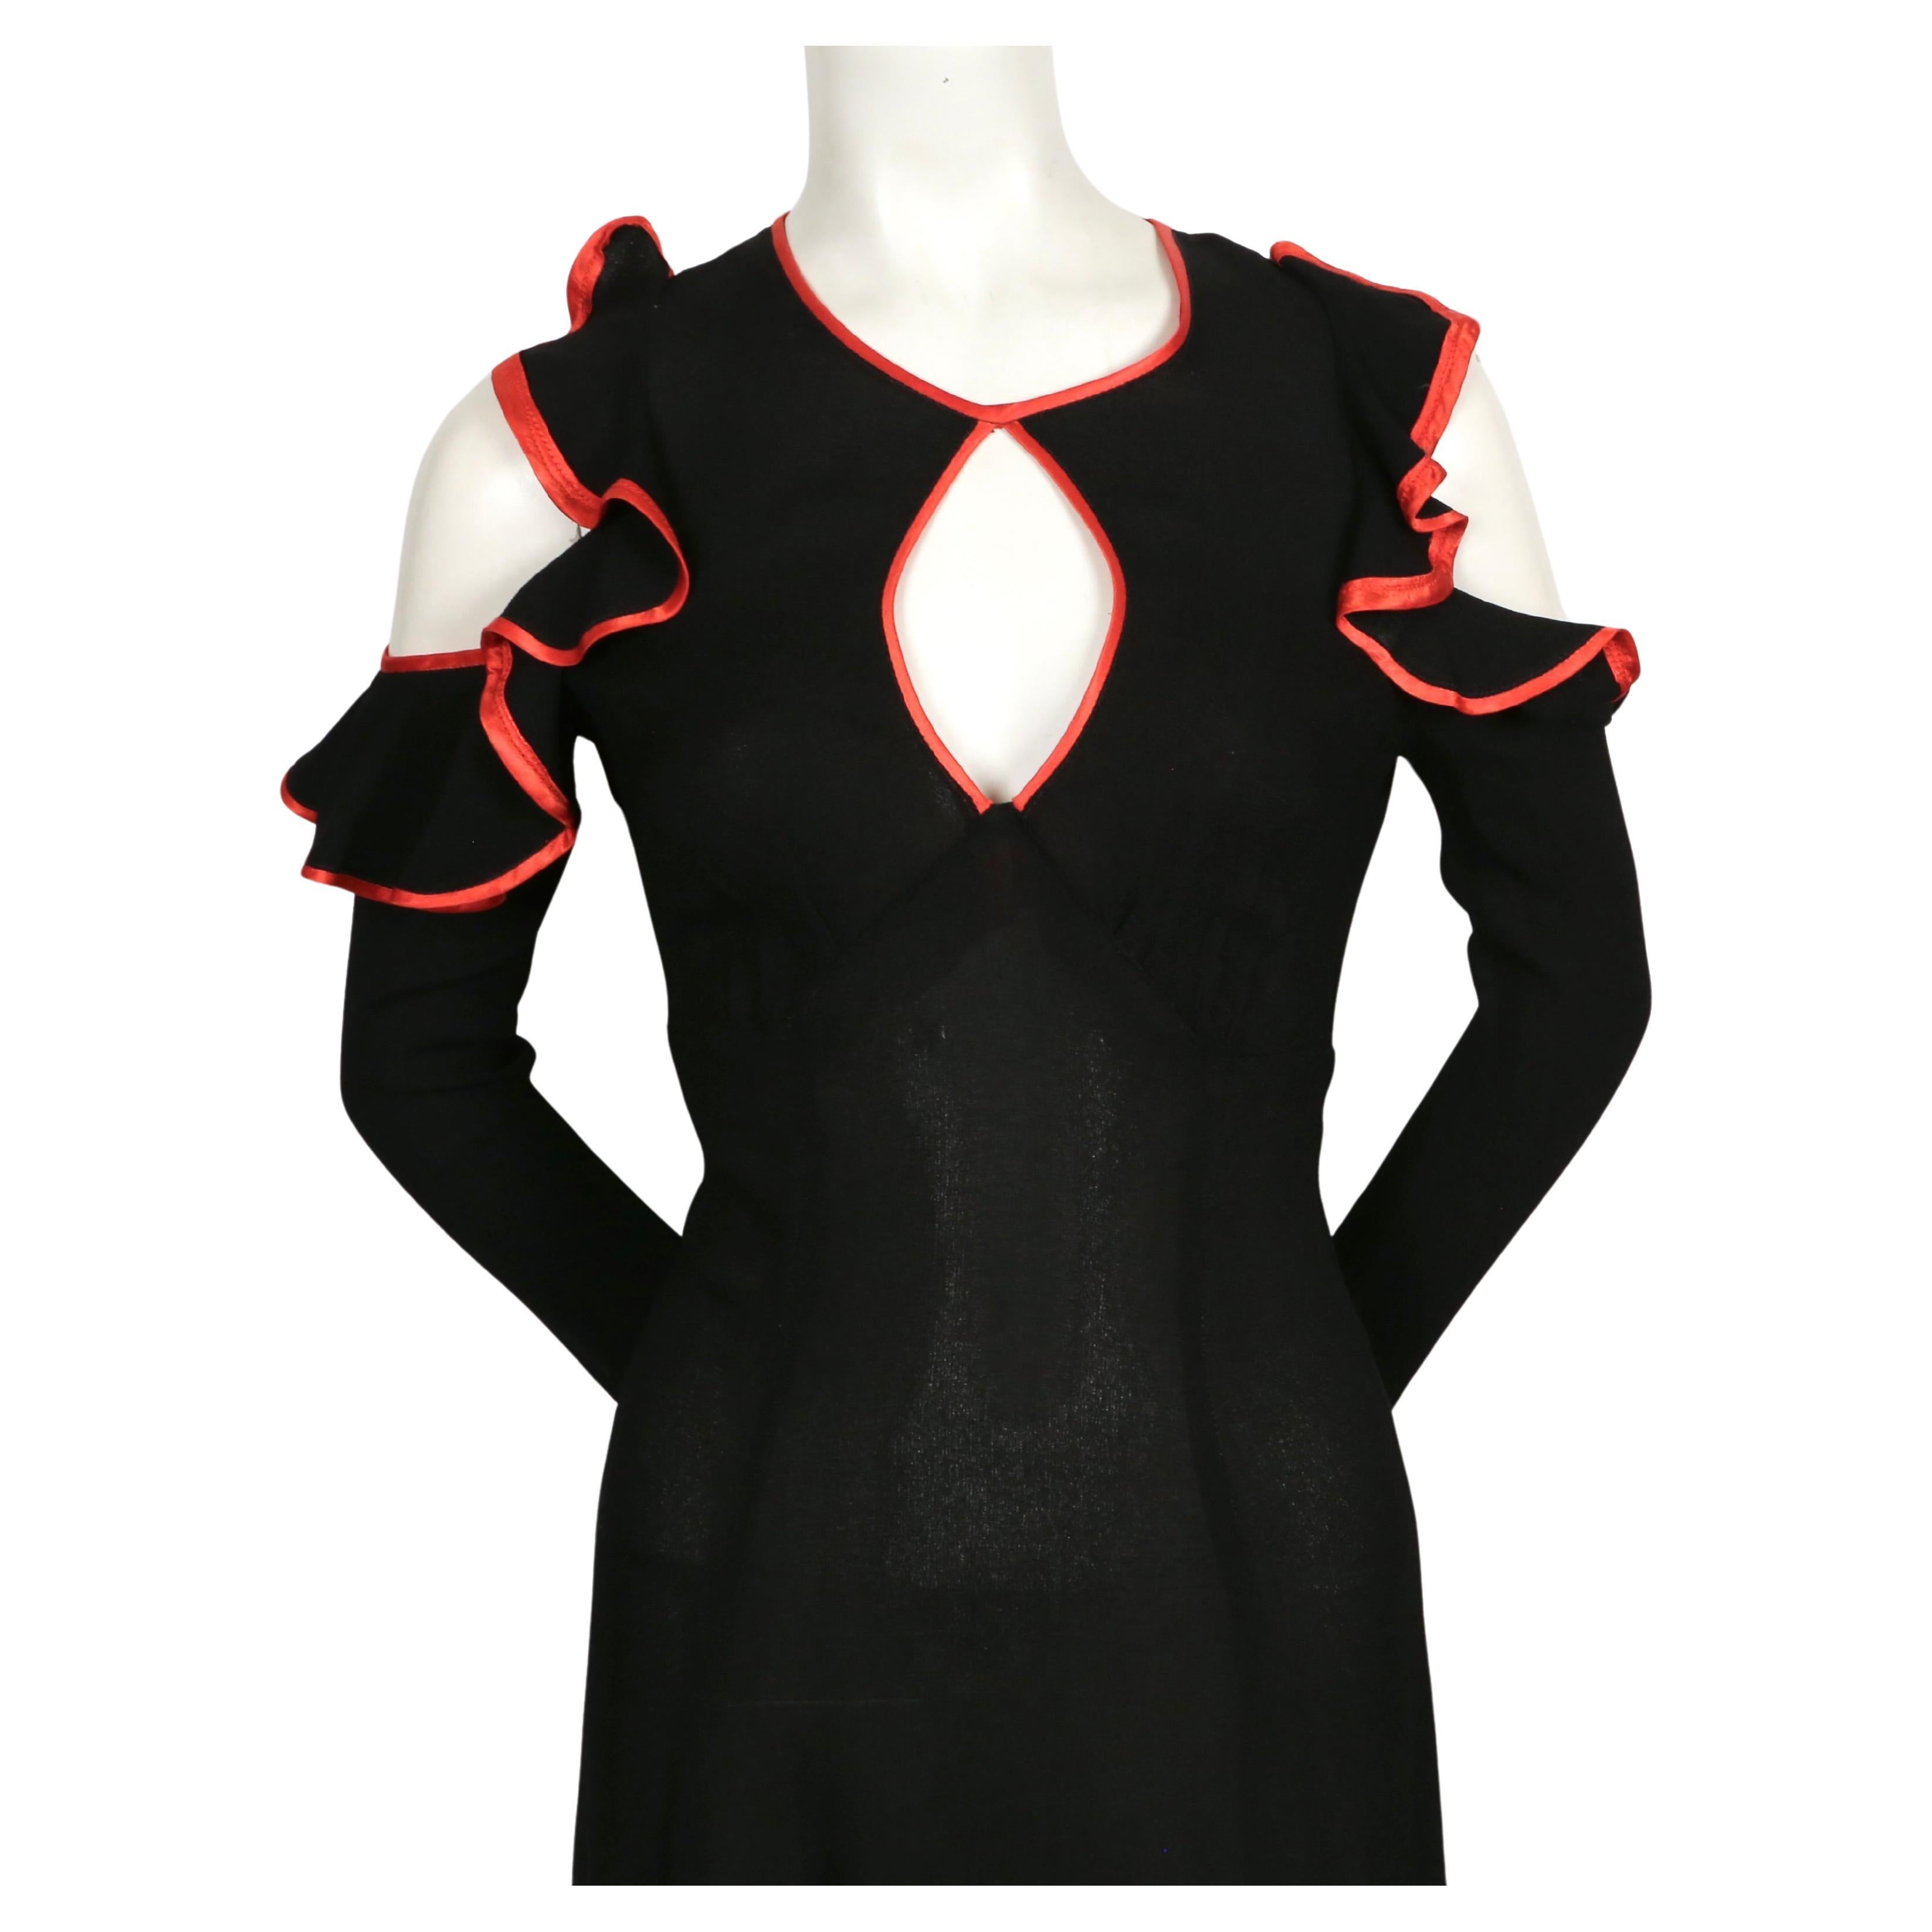 1968 OSSIE CLARK black moss crepe dress with keyhole neckline ruffles & red trim In Good Condition For Sale In San Fransisco, CA